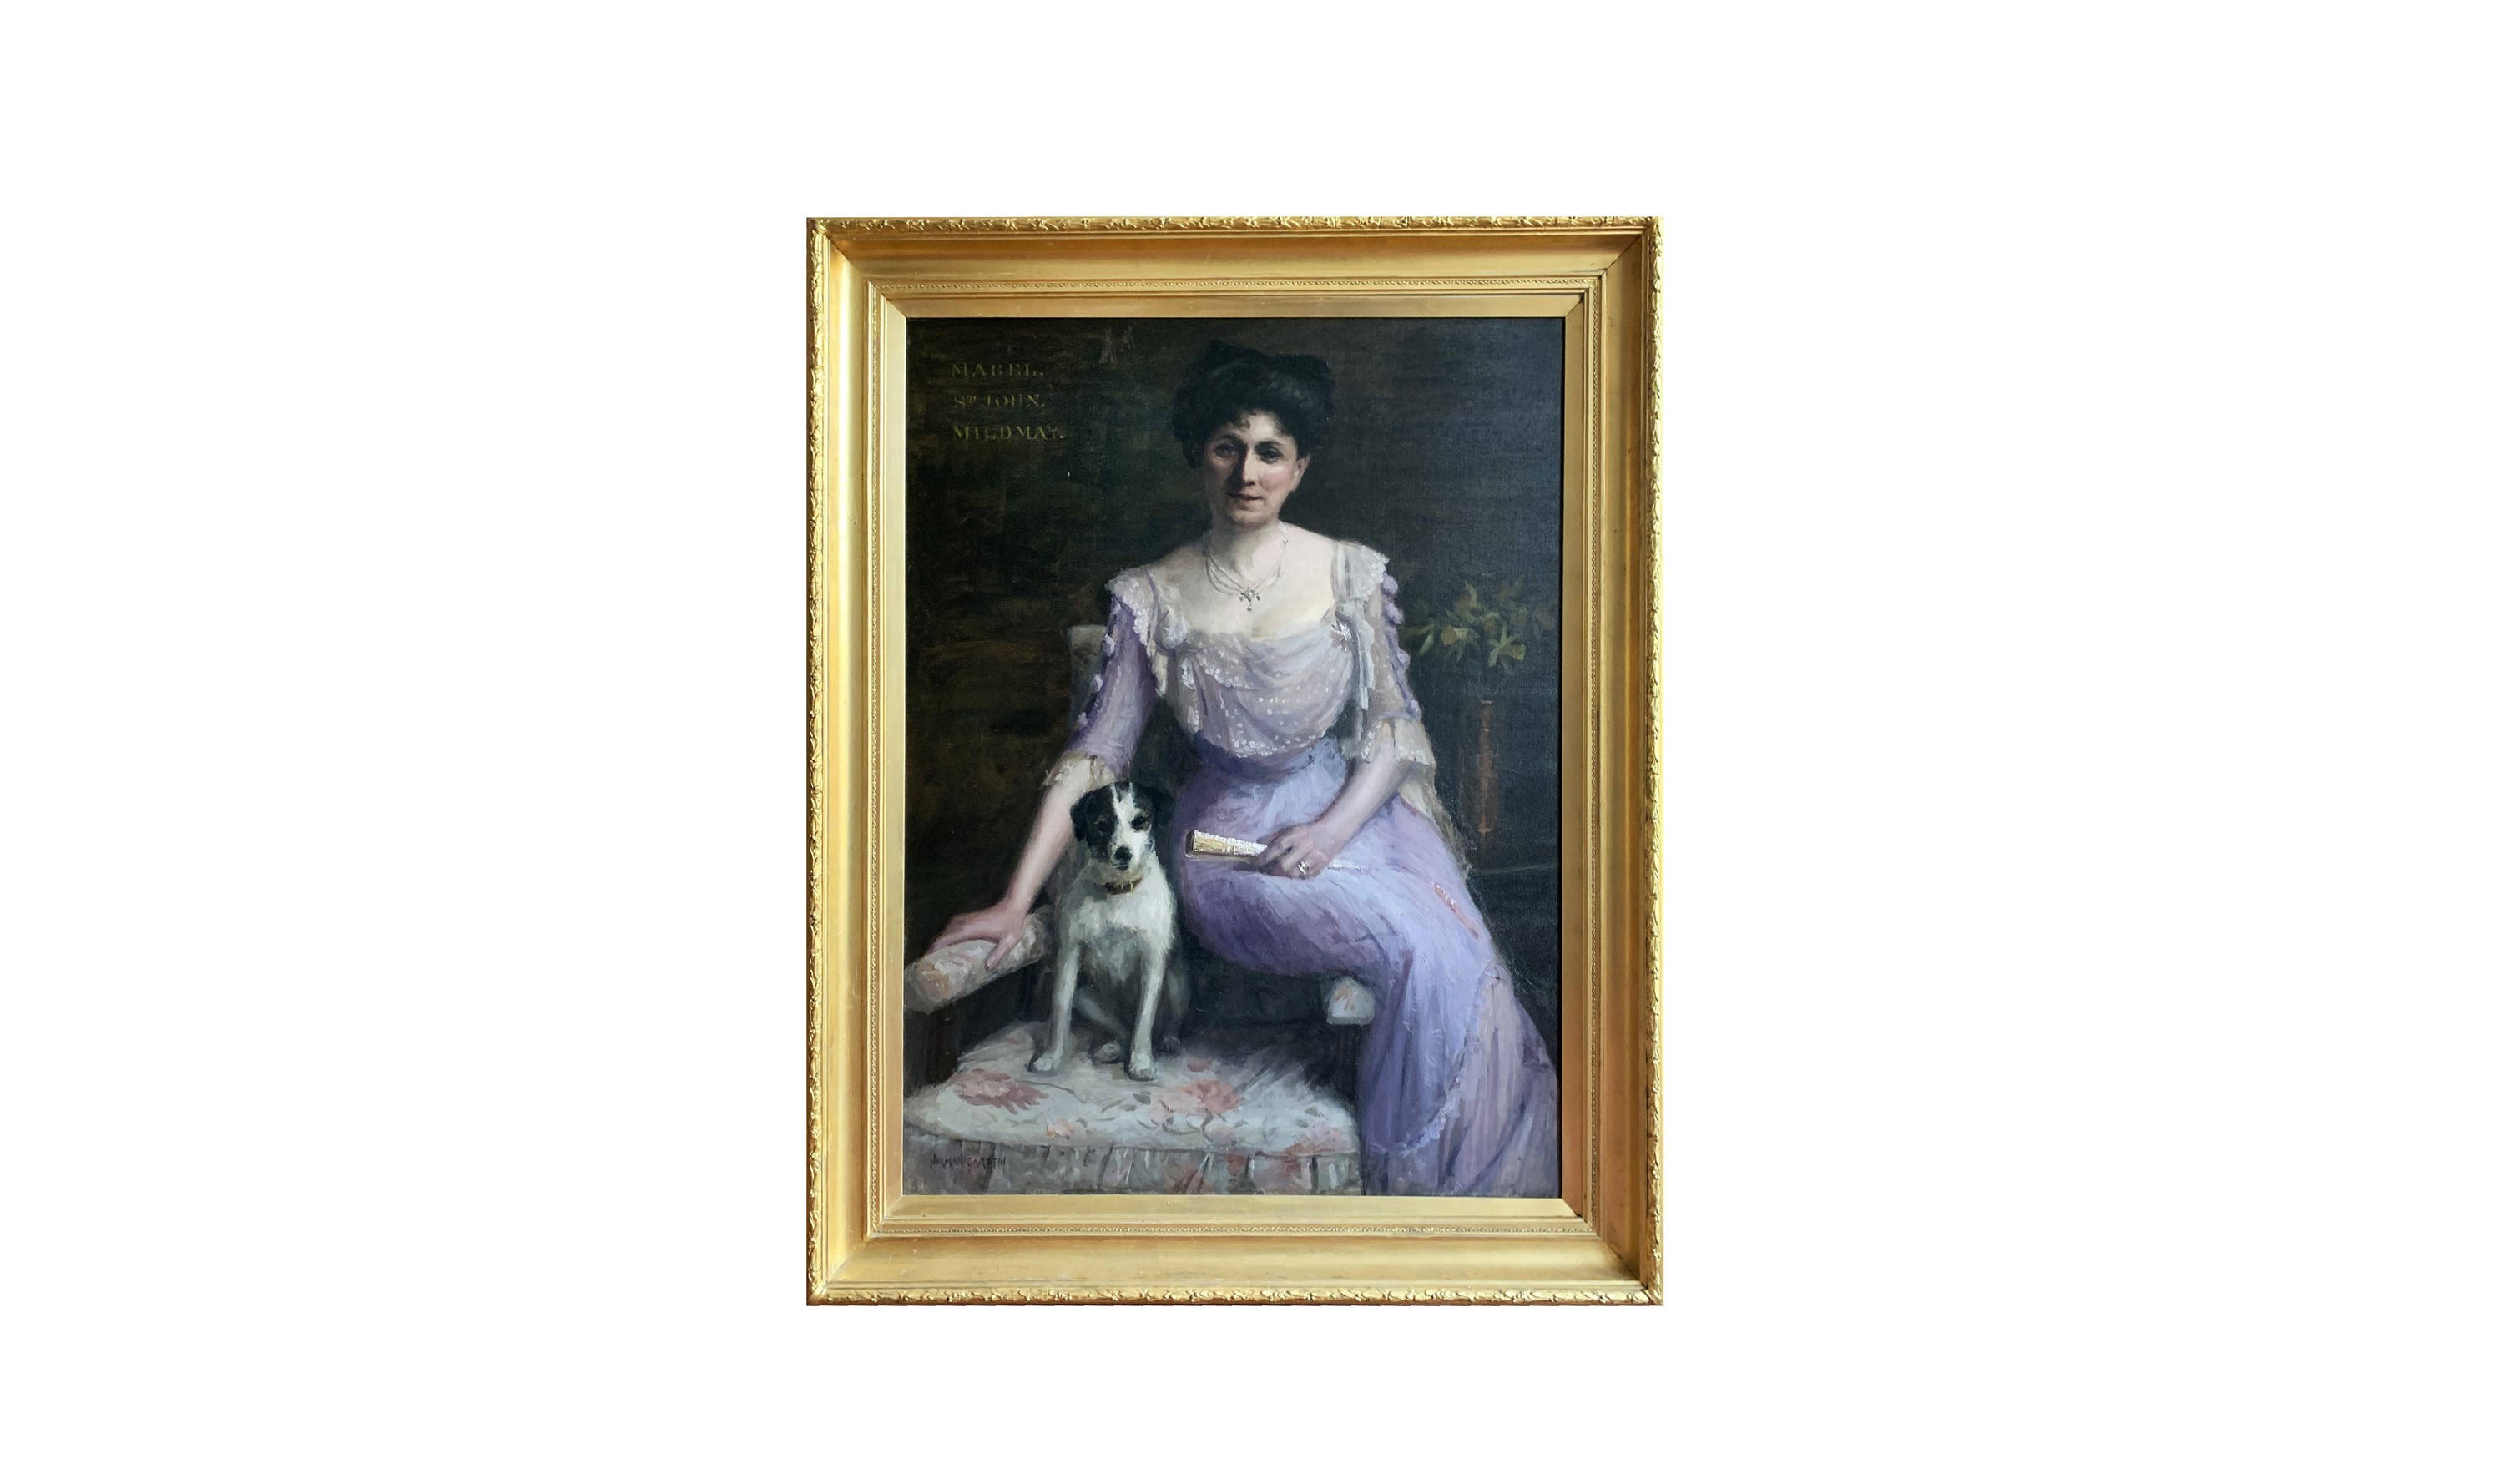  The Lilac Dress, A portrait of Mabel St John Mildmay, she sits on the arm of a chair a terrier at her side. By Norman Garstin.